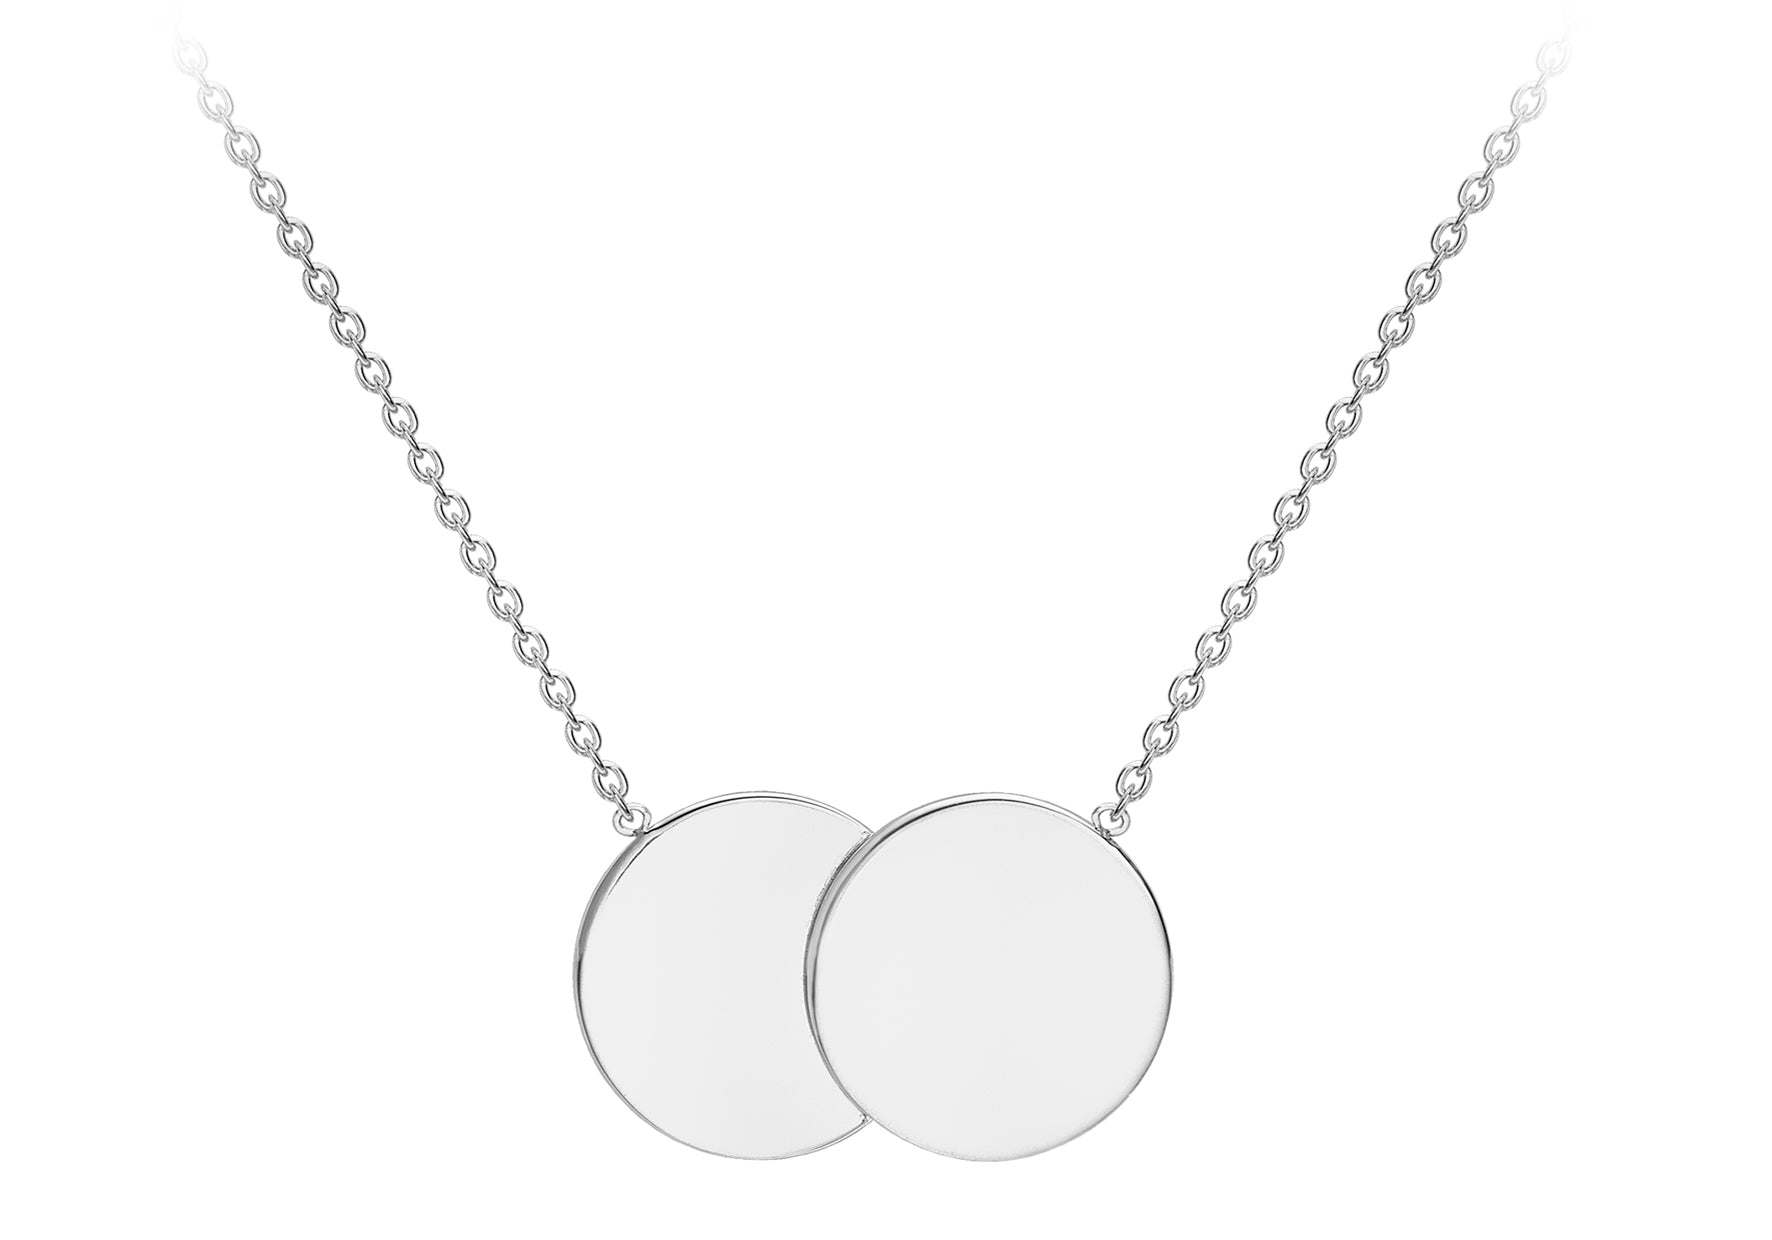 9ct White Gold Double Disk Adjustable Necklace Close up